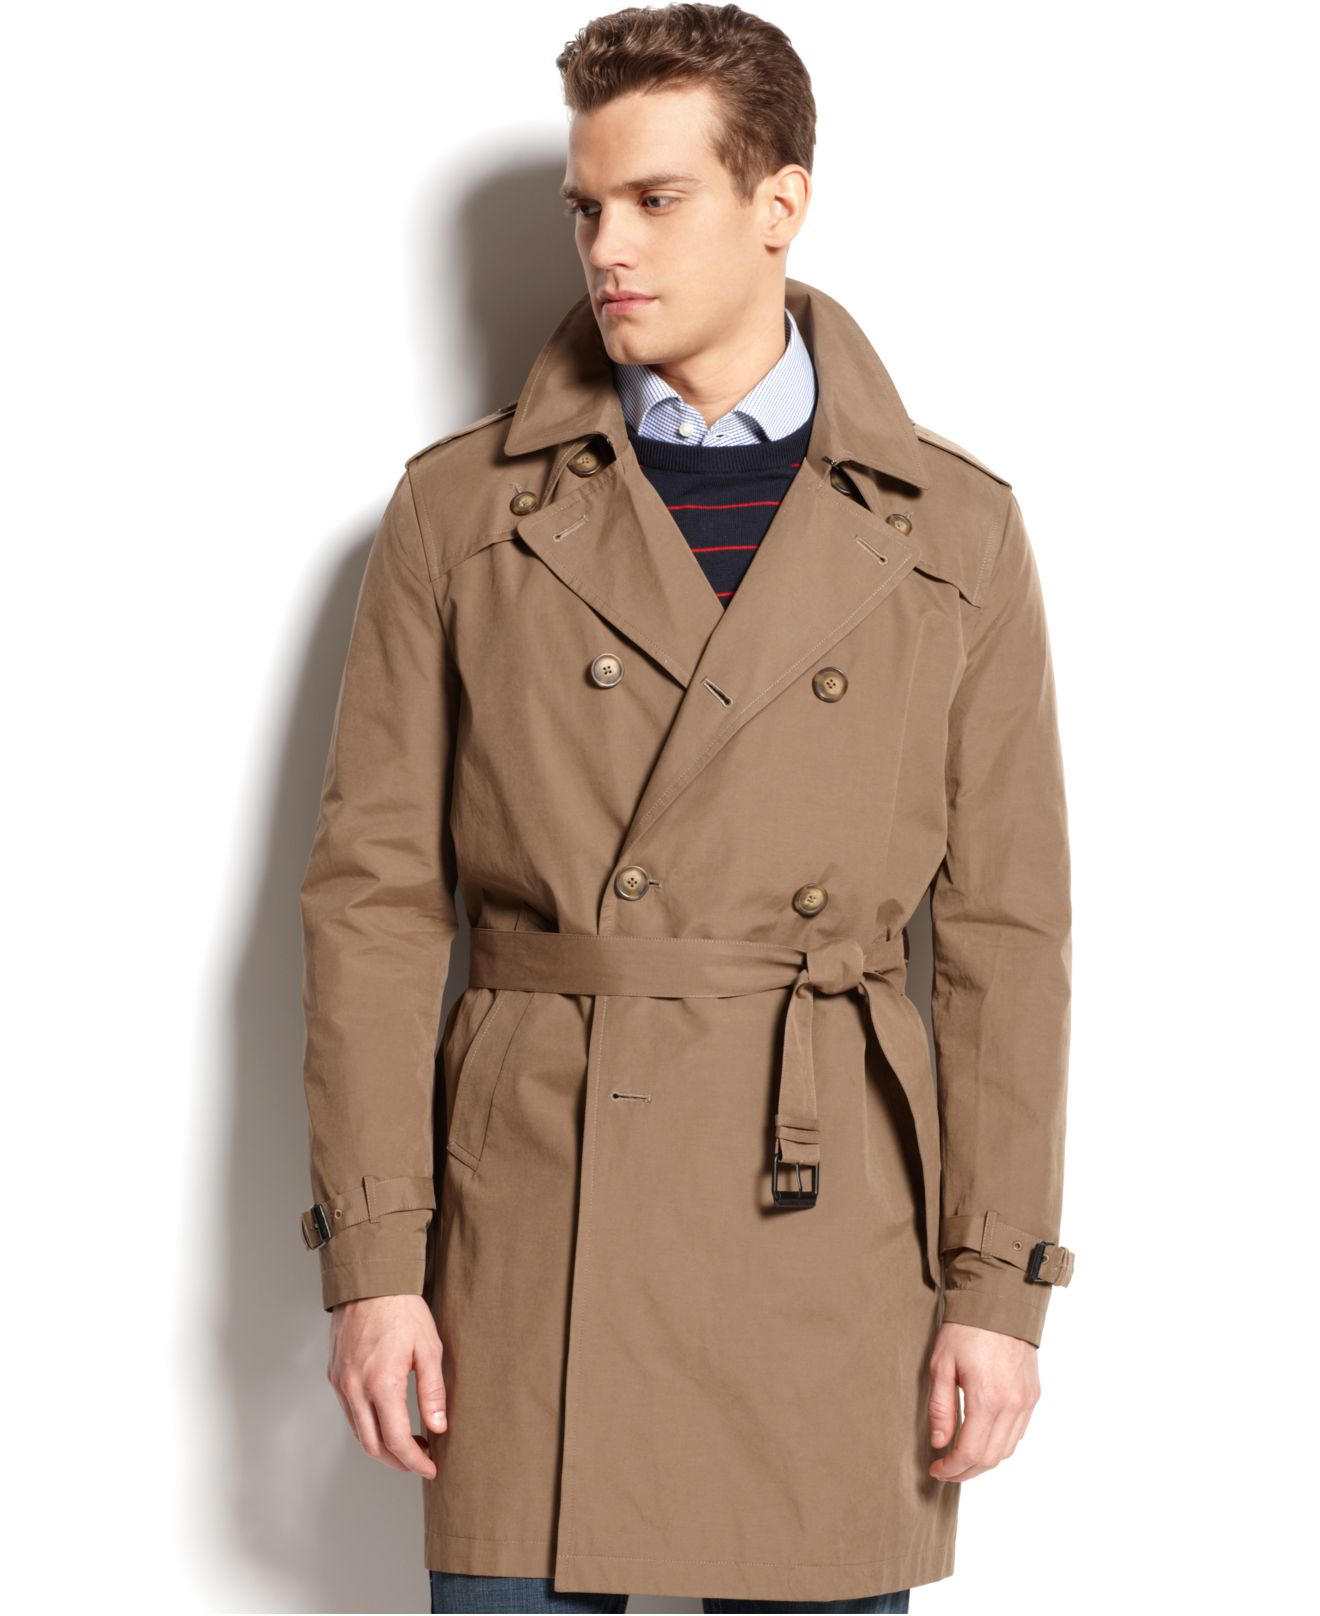 Lyst - Tommy Hilfiger Double-breasted Belted Trench Coat in Natural for Men